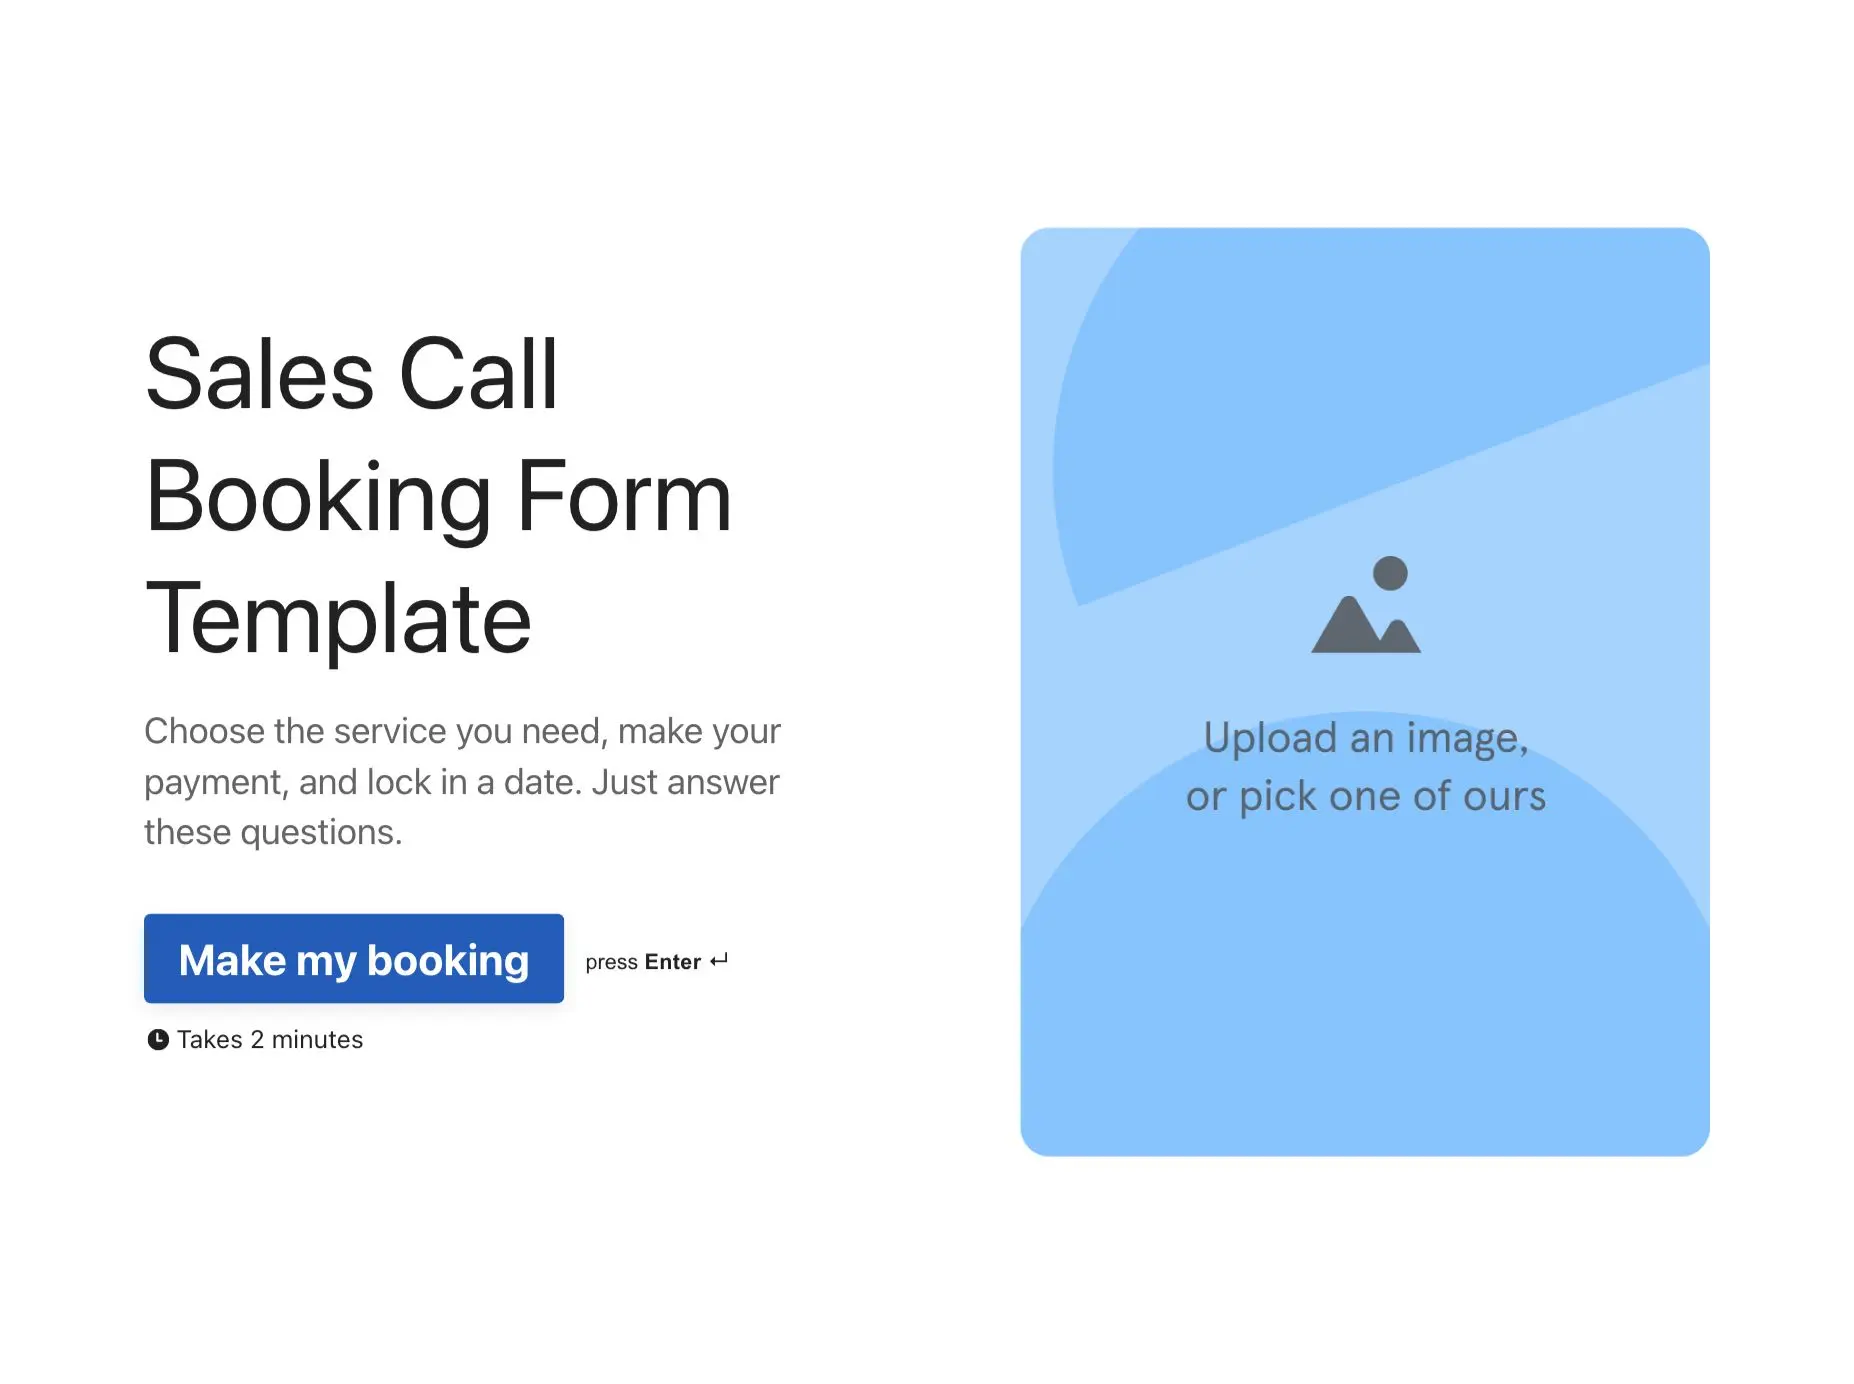 Sales Call Booking Form Template Hero